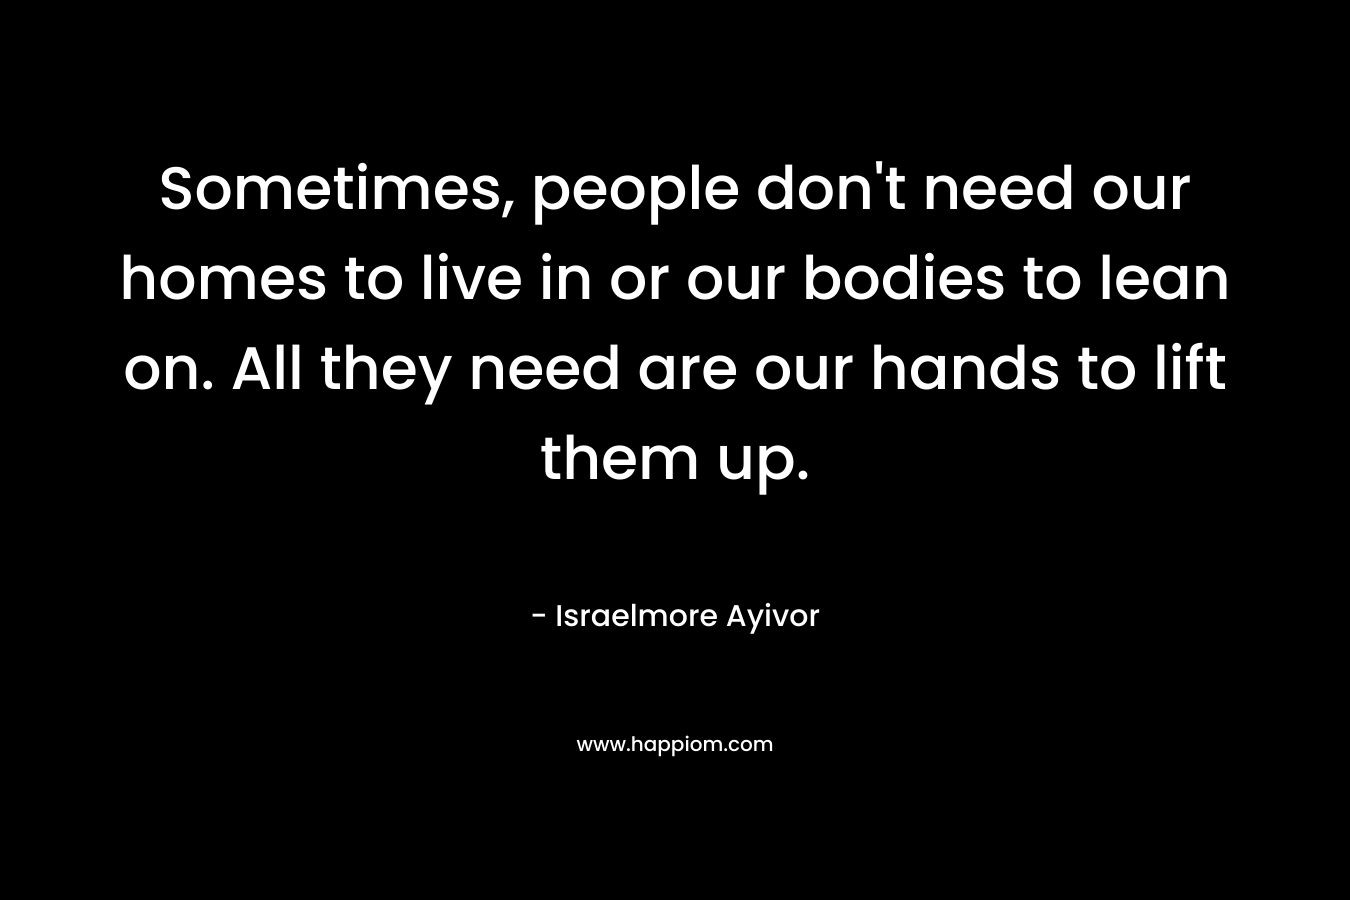 Sometimes, people don’t need our homes to live in or our bodies to lean on. All they need are our hands to lift them up. – Israelmore Ayivor